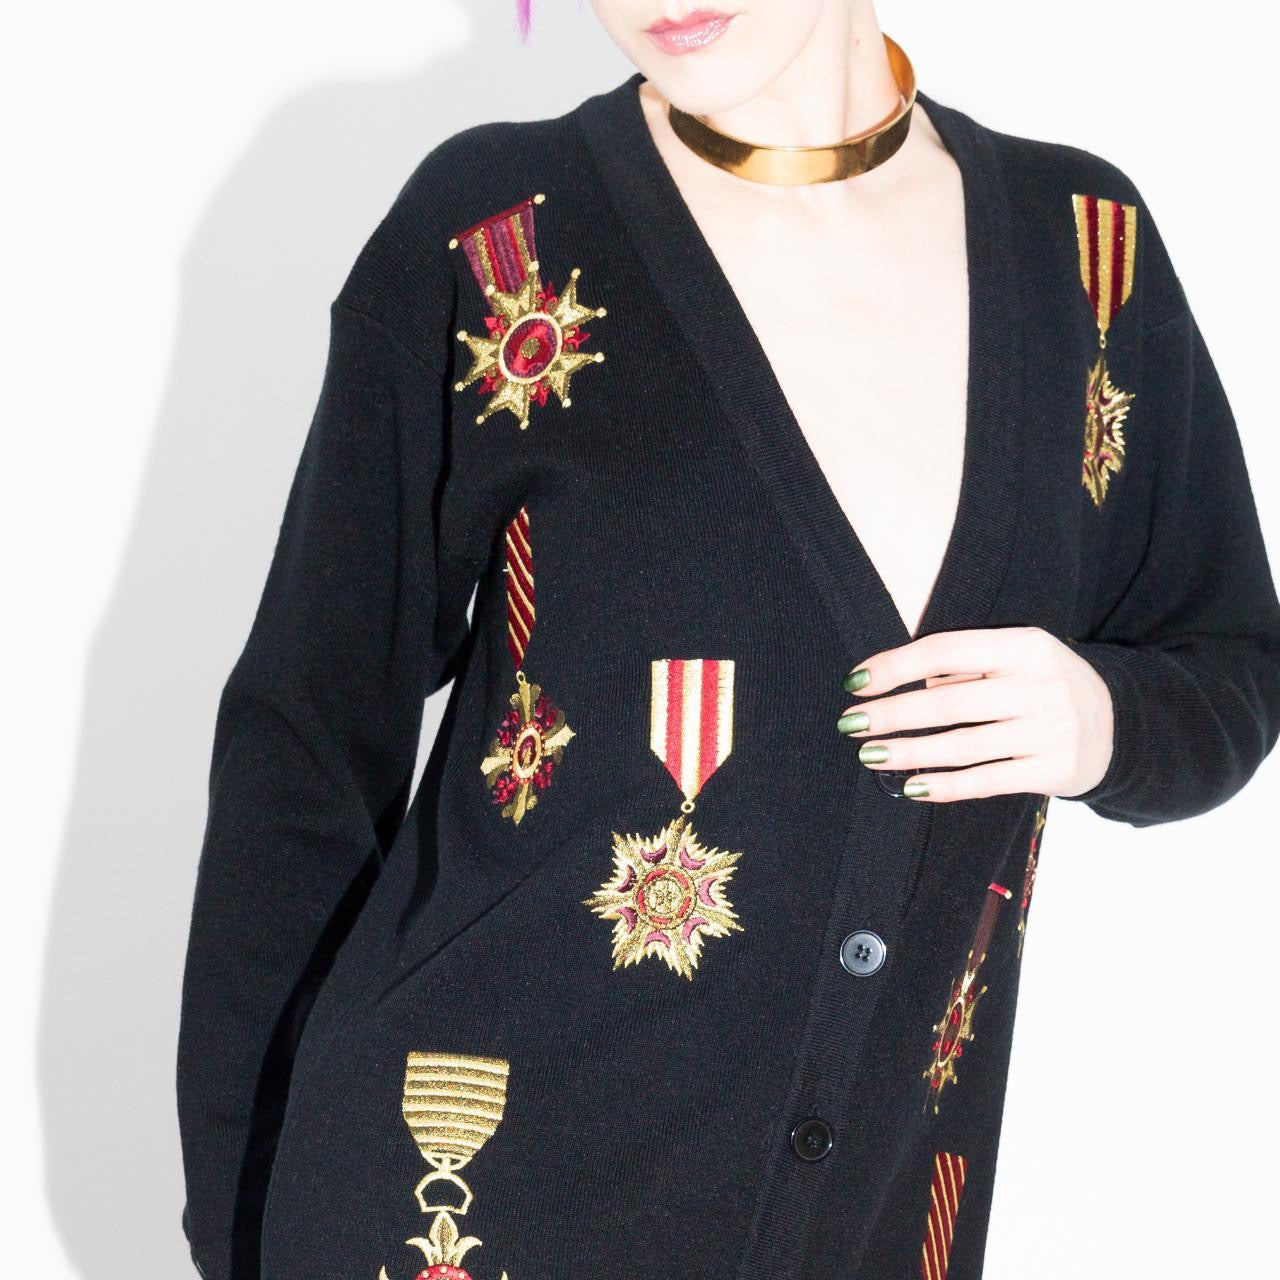 Vintage 90s Black Cardigan Sweater with Medals